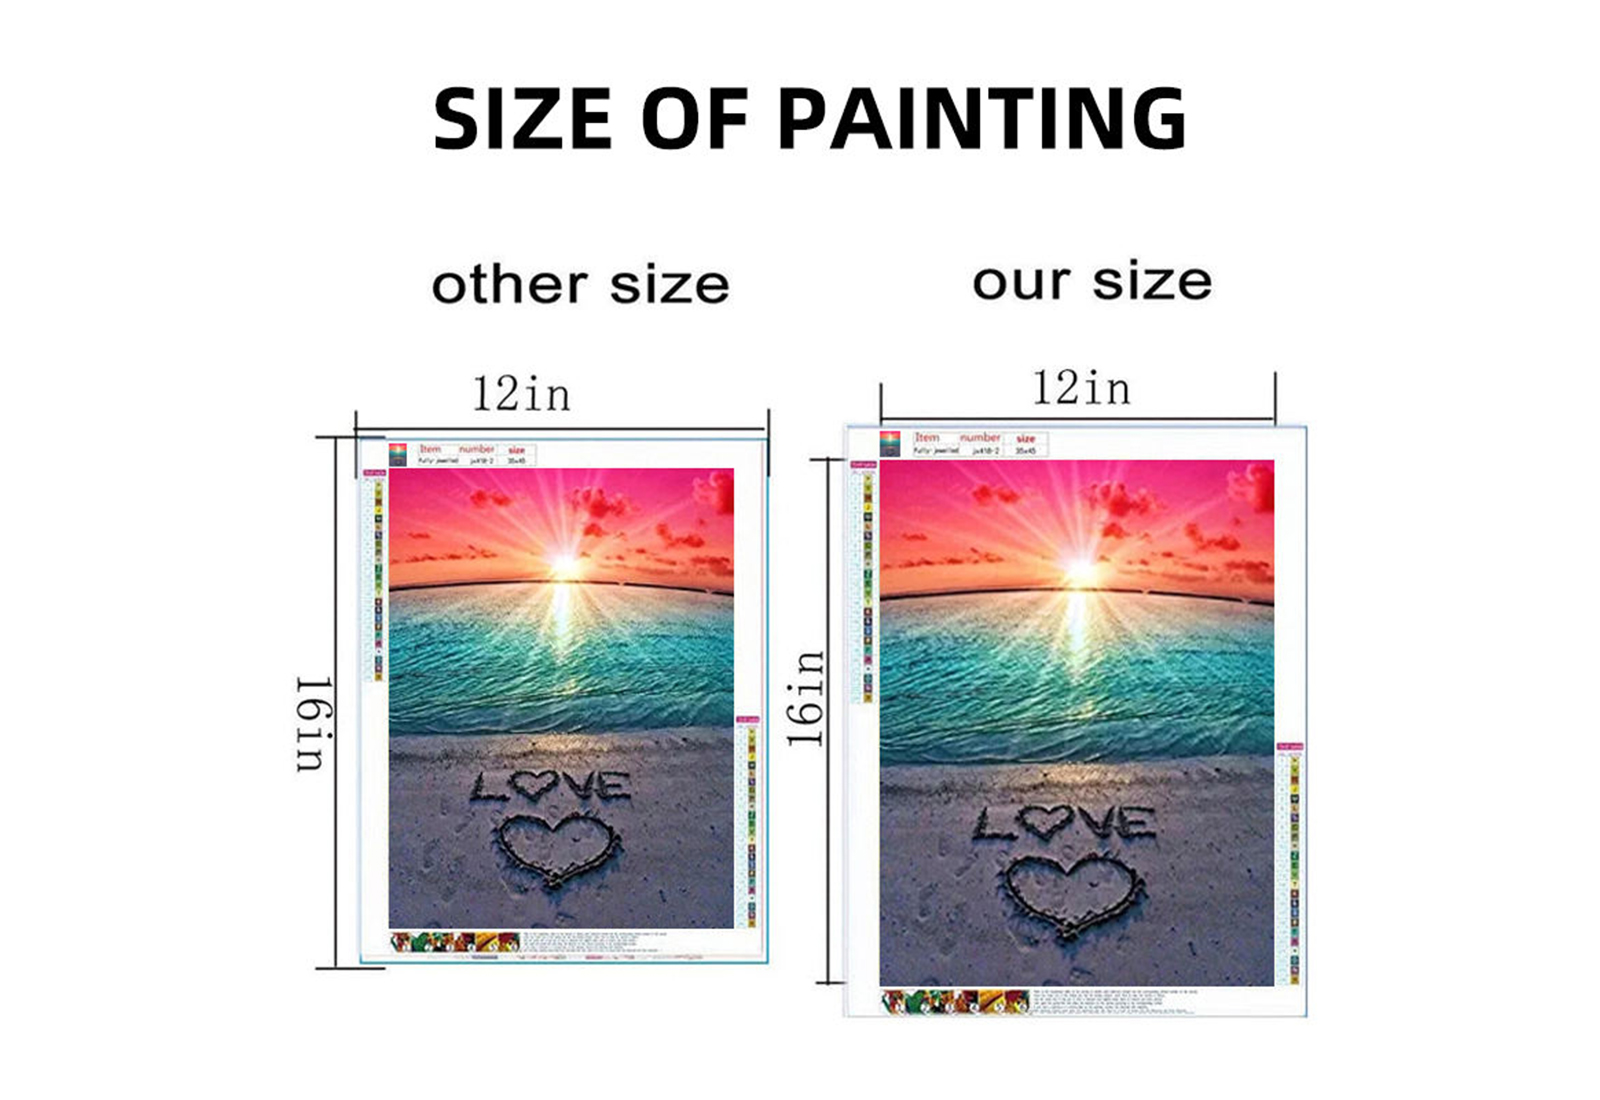 Diamond Painting From The Manufacturer